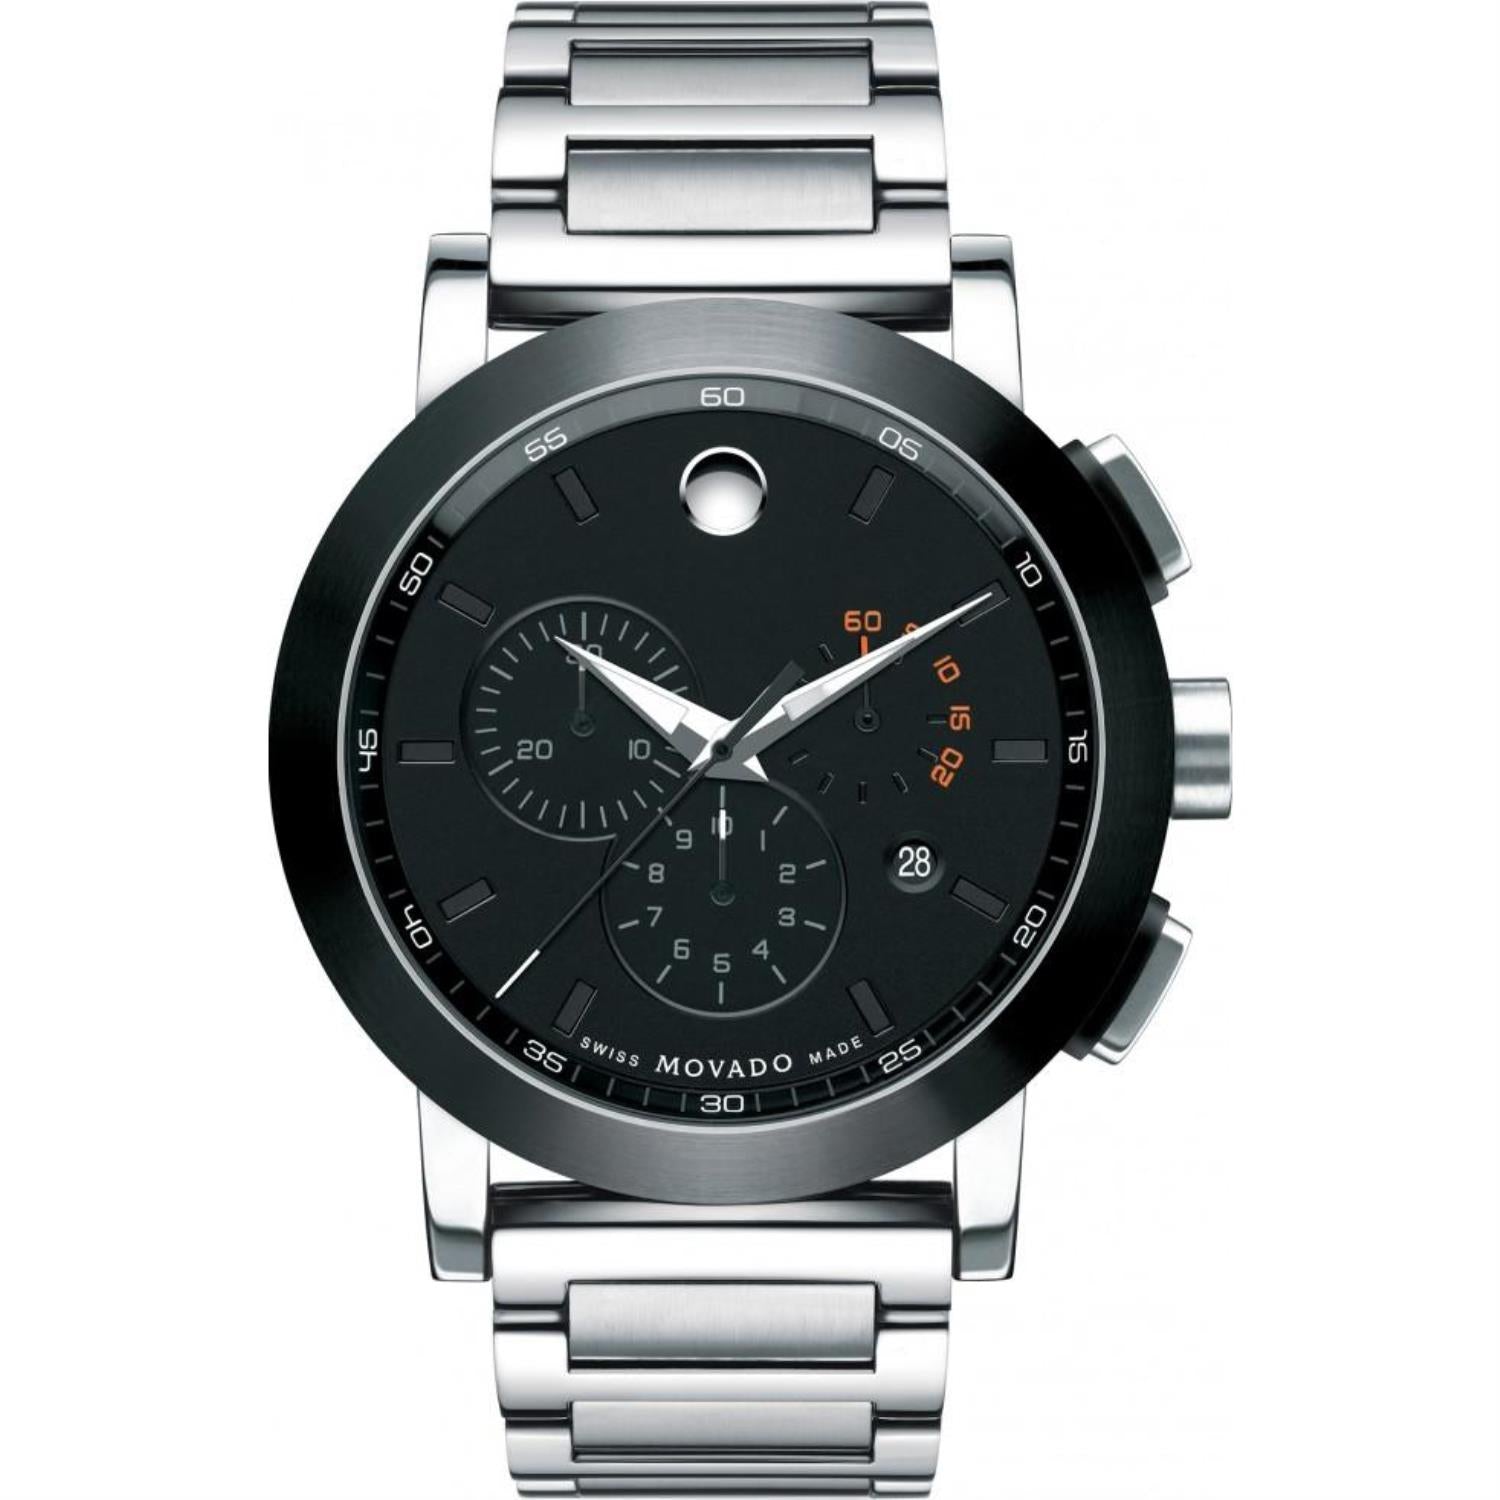 Movado Museum Sport 44MM Dial. Black Jewelers – 0606792 Chronograph Daniels with